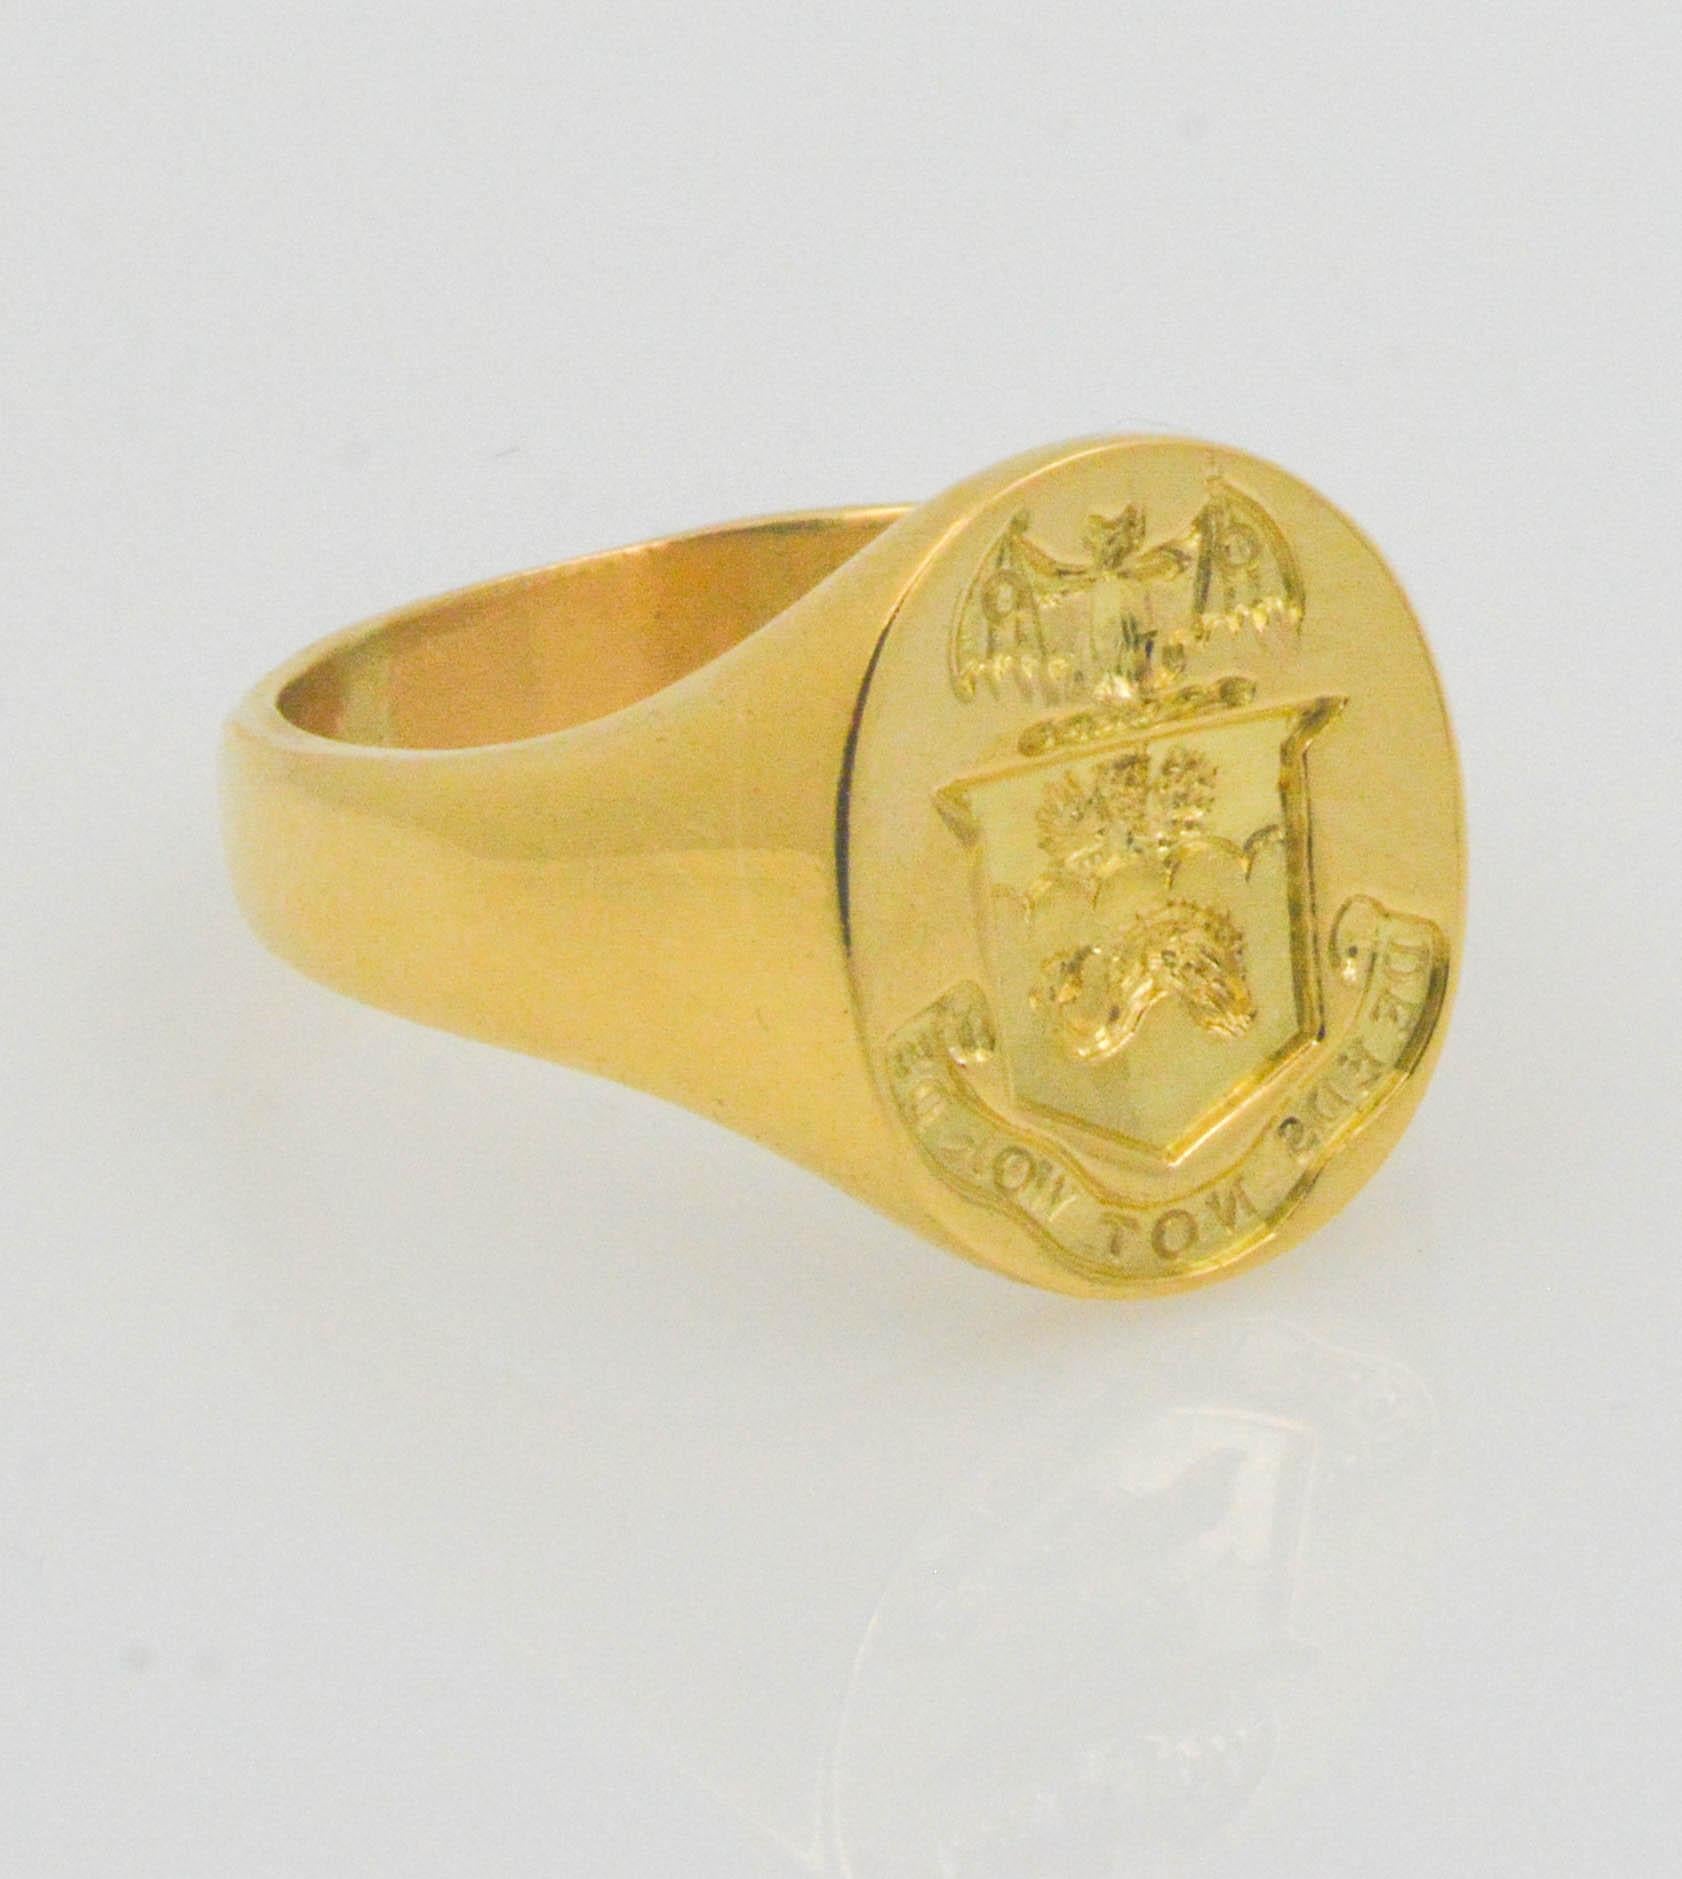 This bold and masculine ring conveys a strong message for the proud man in your life. Set in 18K yellow gold with a brilliant shine and polish; this signet ring has an English crest with a banner saying 'words not deeds'. 

The ring is stamped with